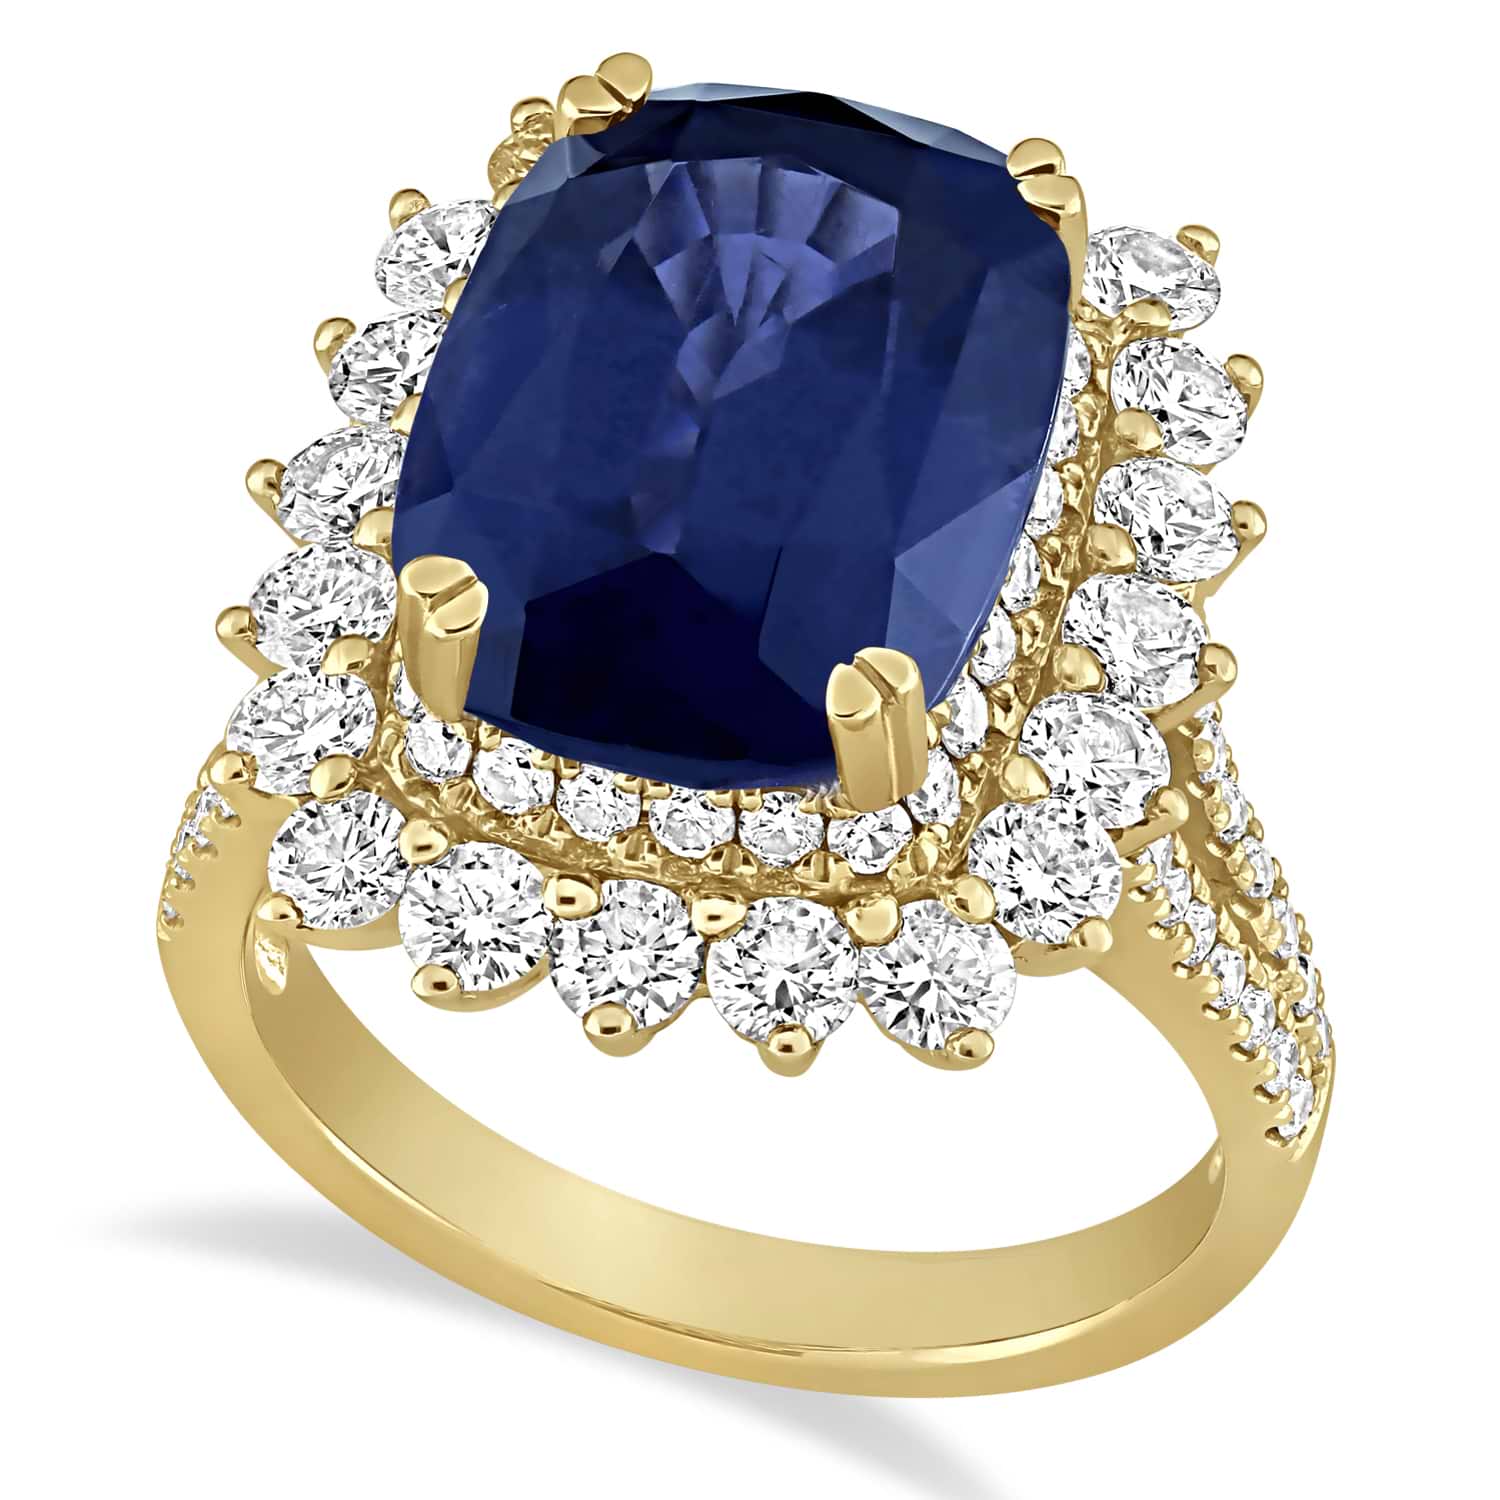 Cushion Spinel & Round Diamond Cocktail Ring 14k Yellow Gold (7.95 ct)